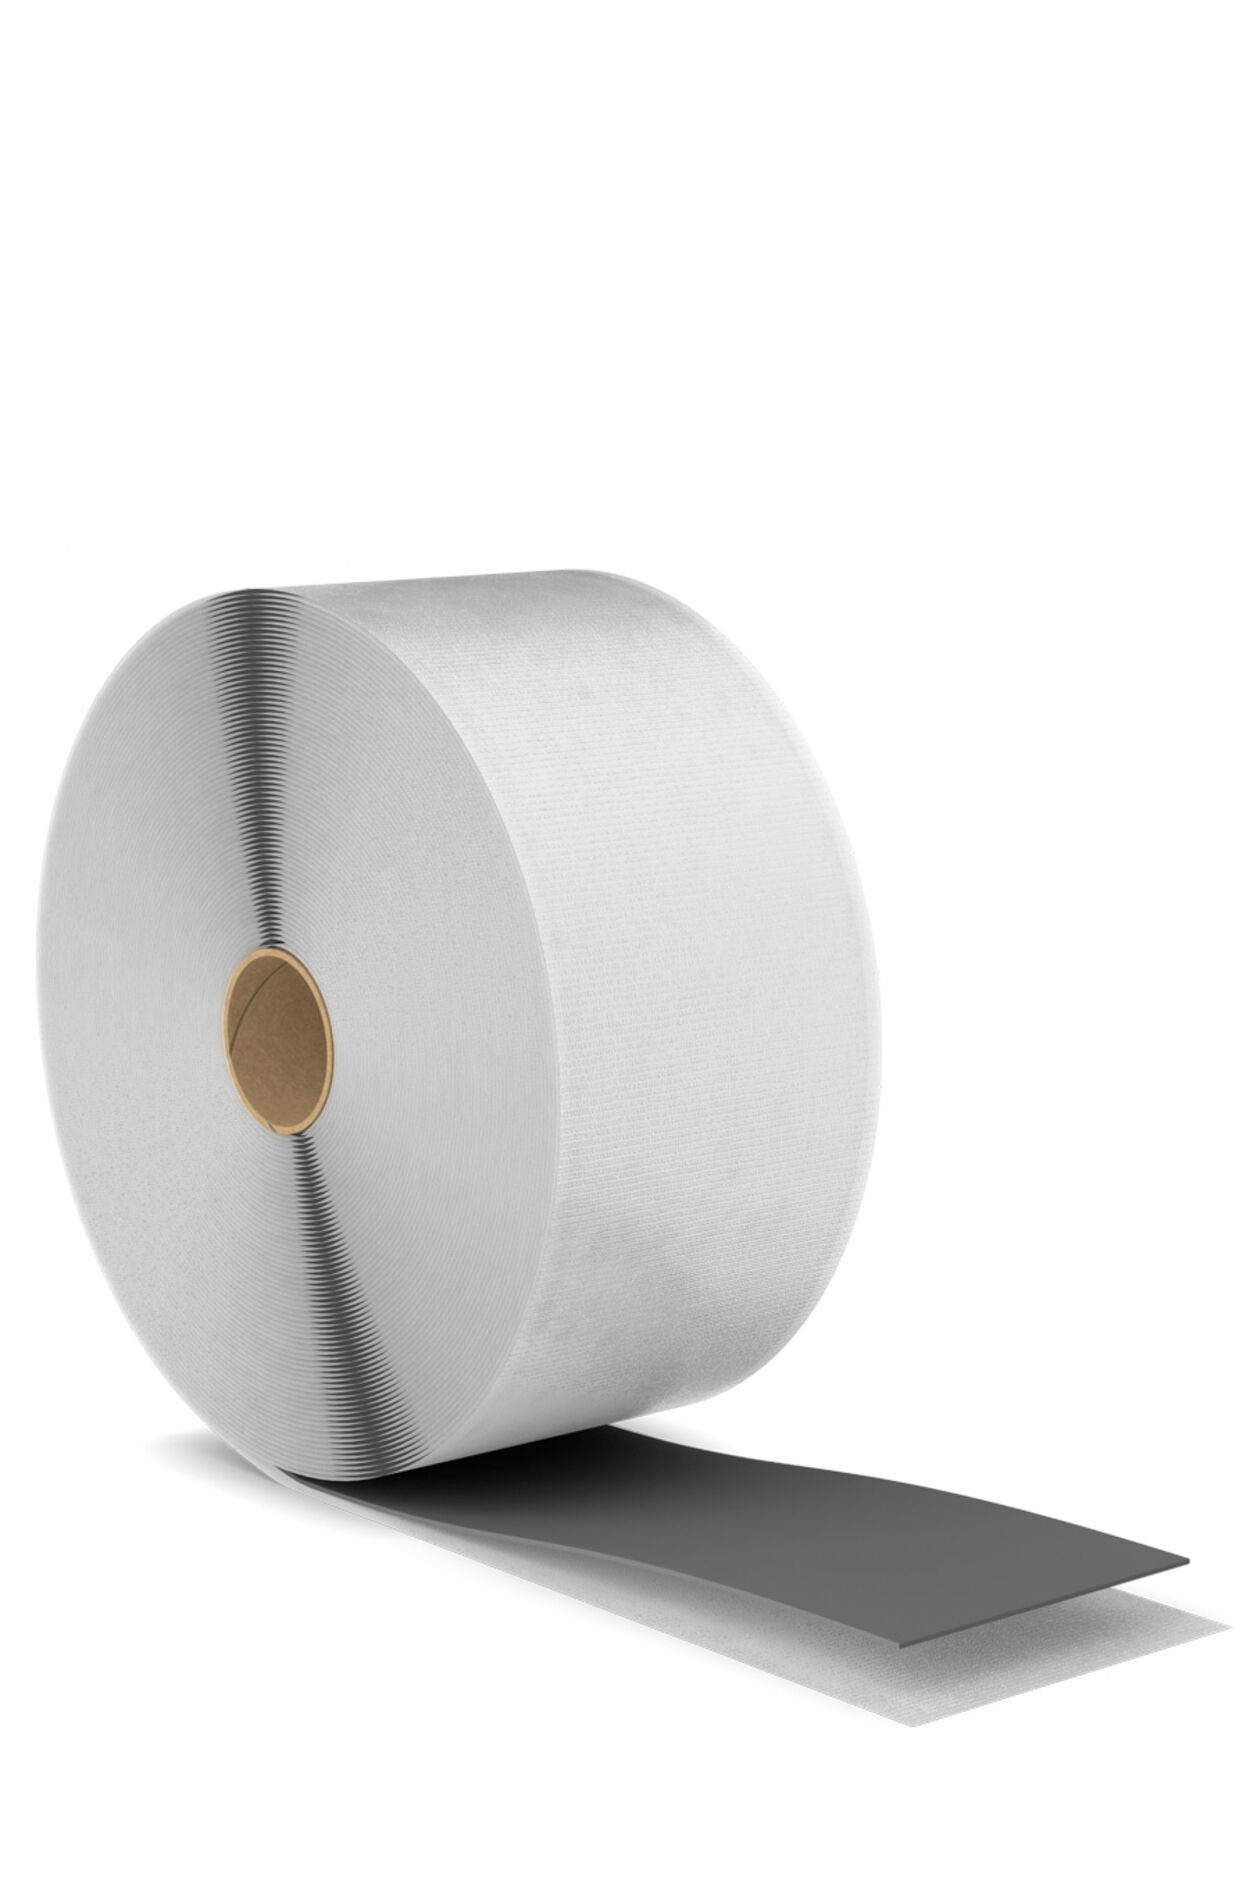 Butyl tape with extremely high adhesive strength for universal sealing